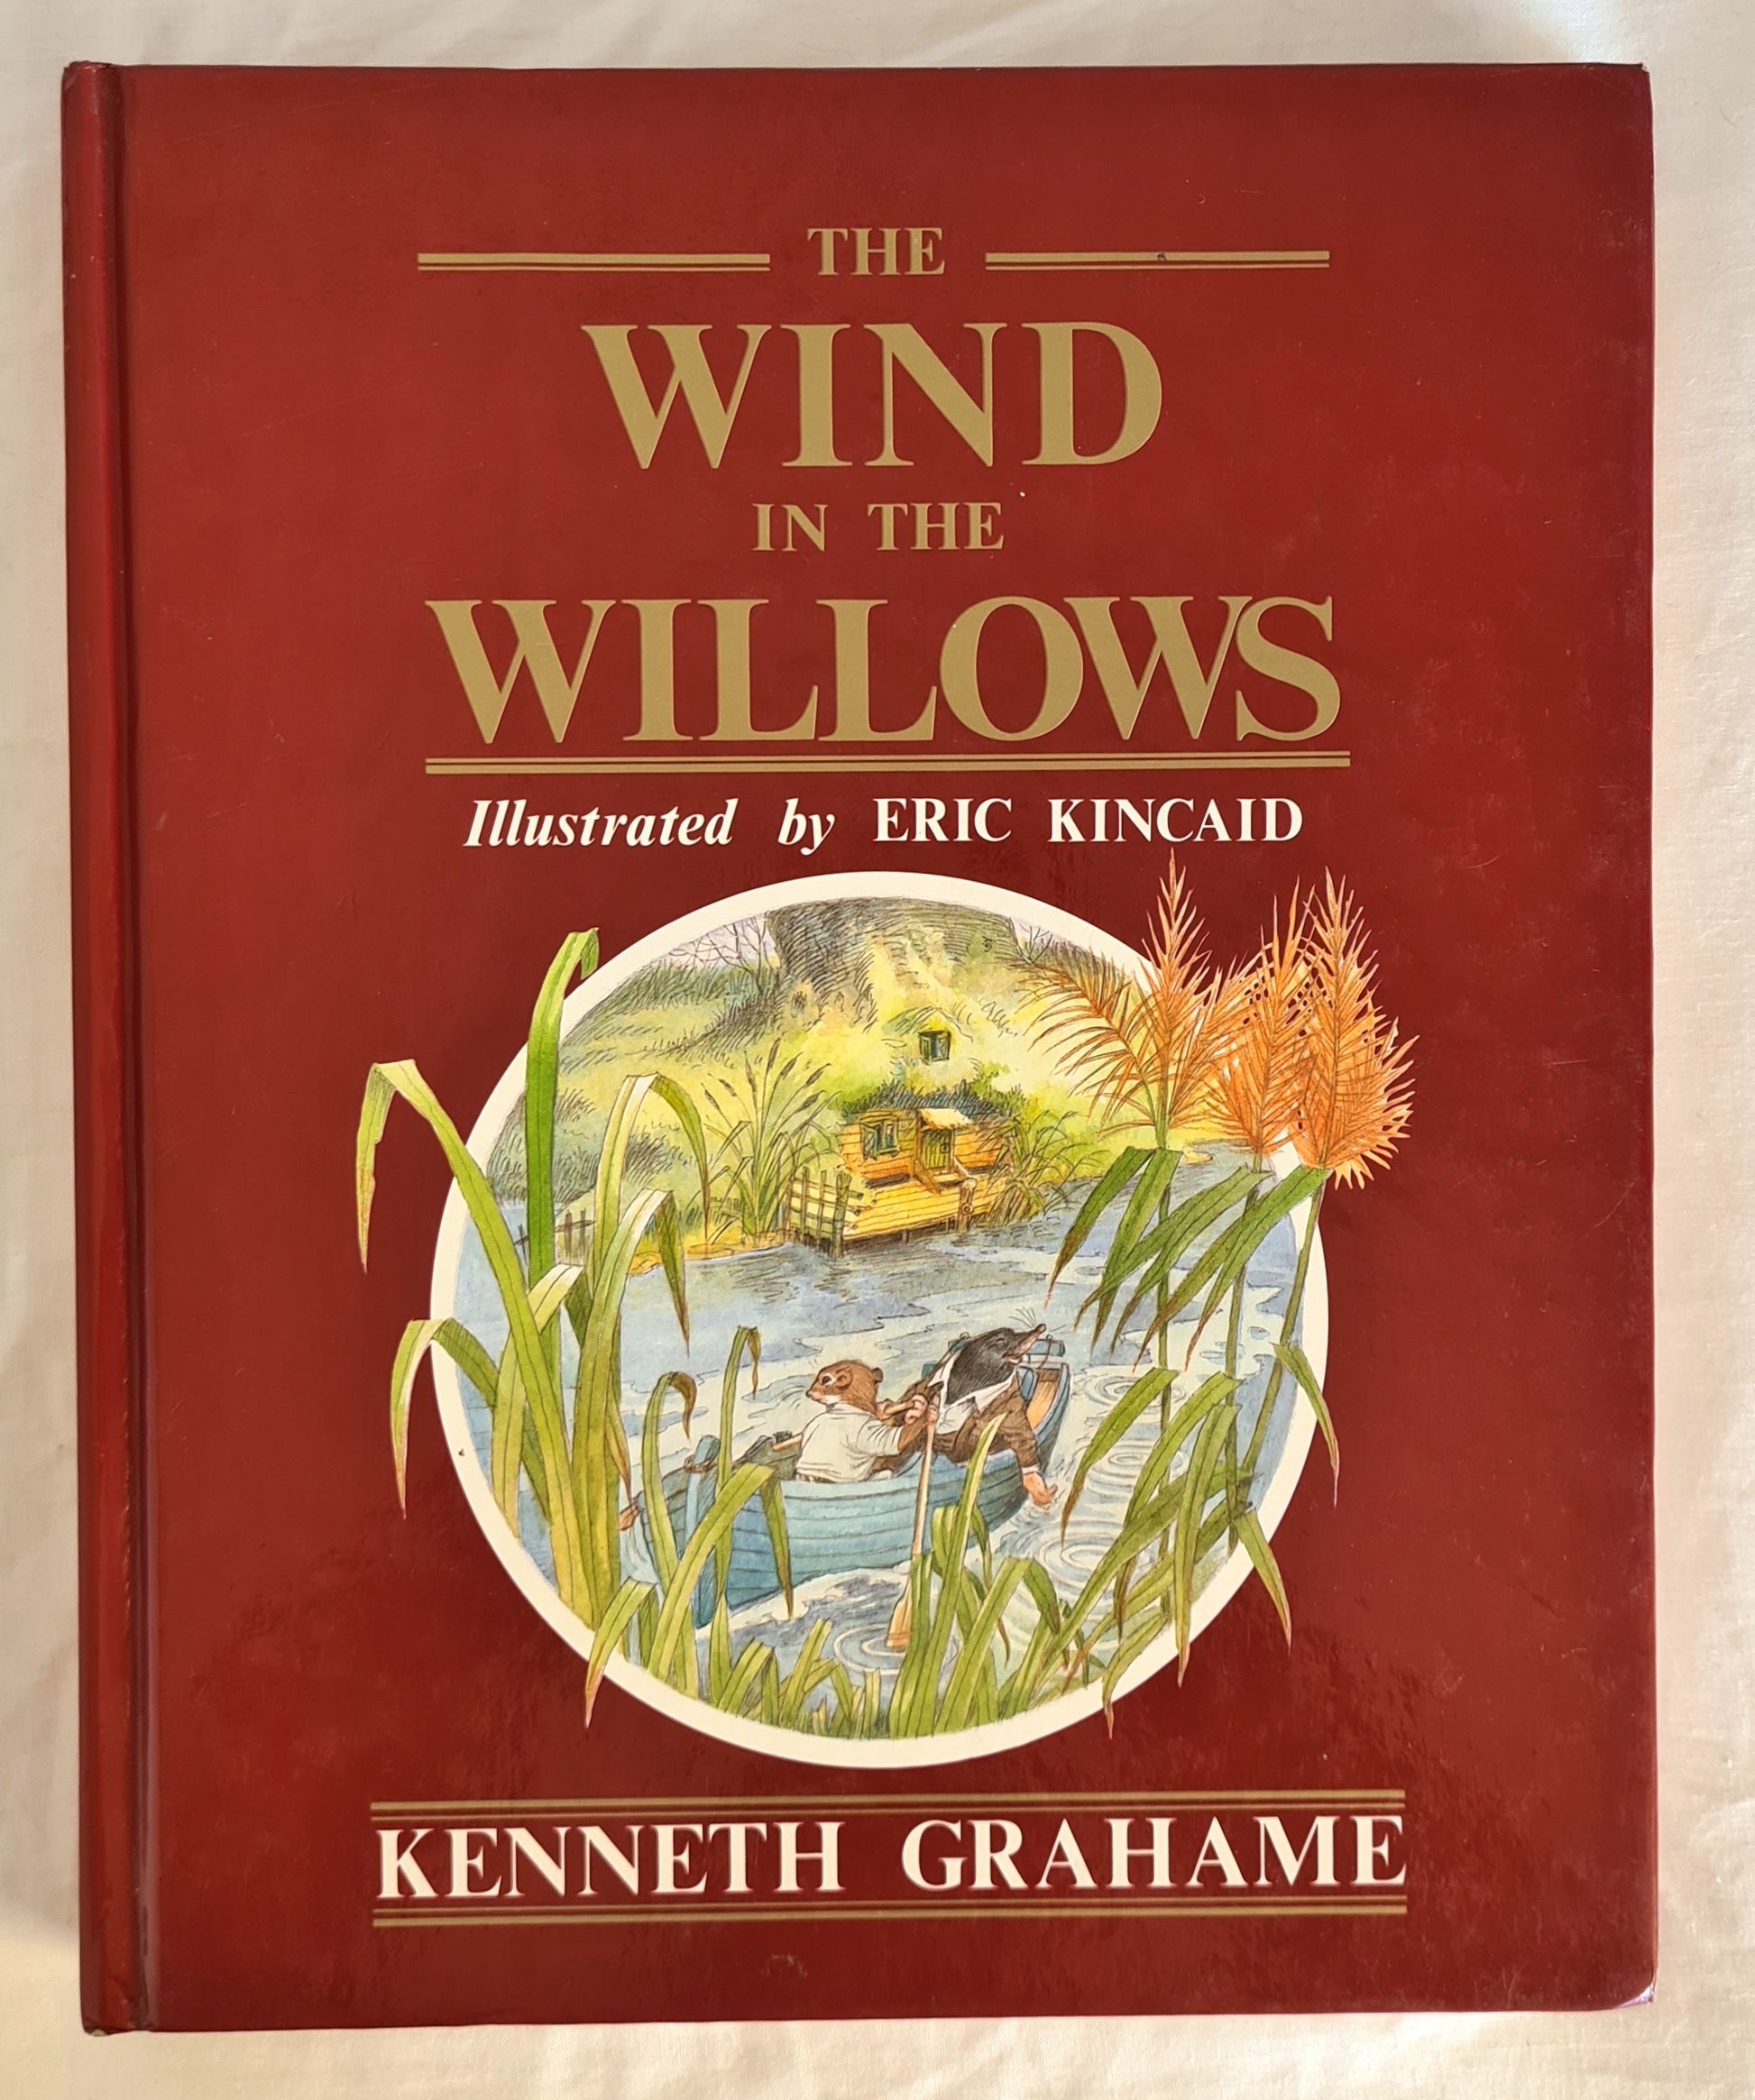 The Wind in the Willows  by Kenneth Grahame  Illustrated by Eric Kincaid